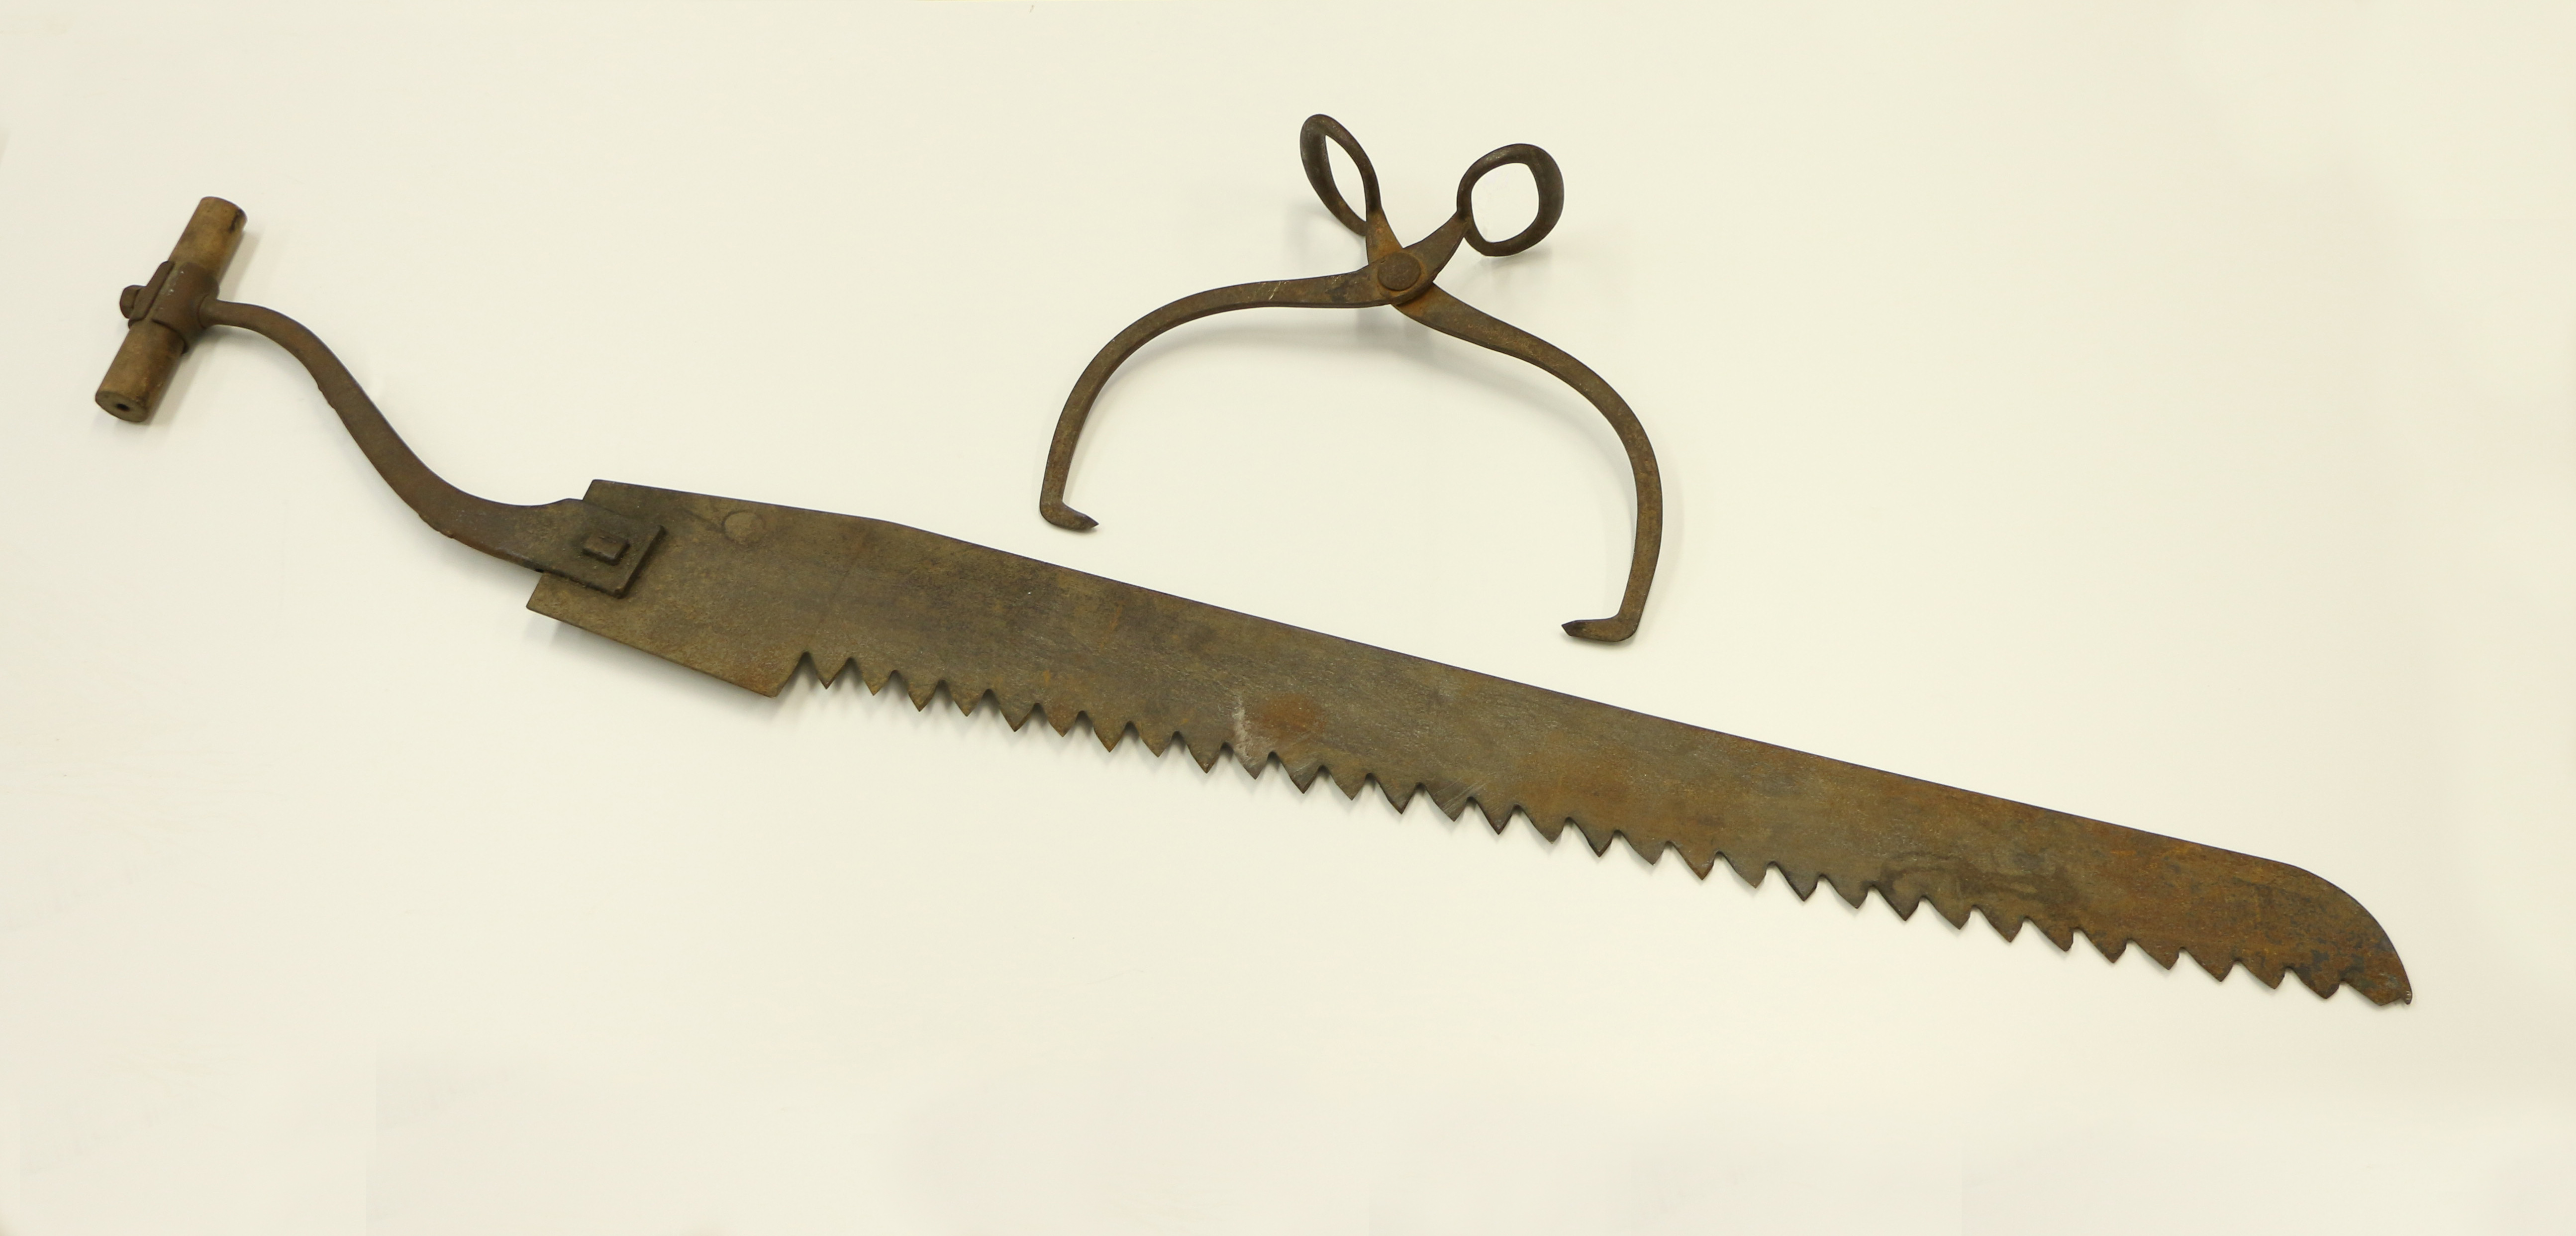 Photograph of ice-cutting tools. On a white background, brown metal ice tongs used to carry blocks of ice, and a rusted iron saw with a wooden handle.